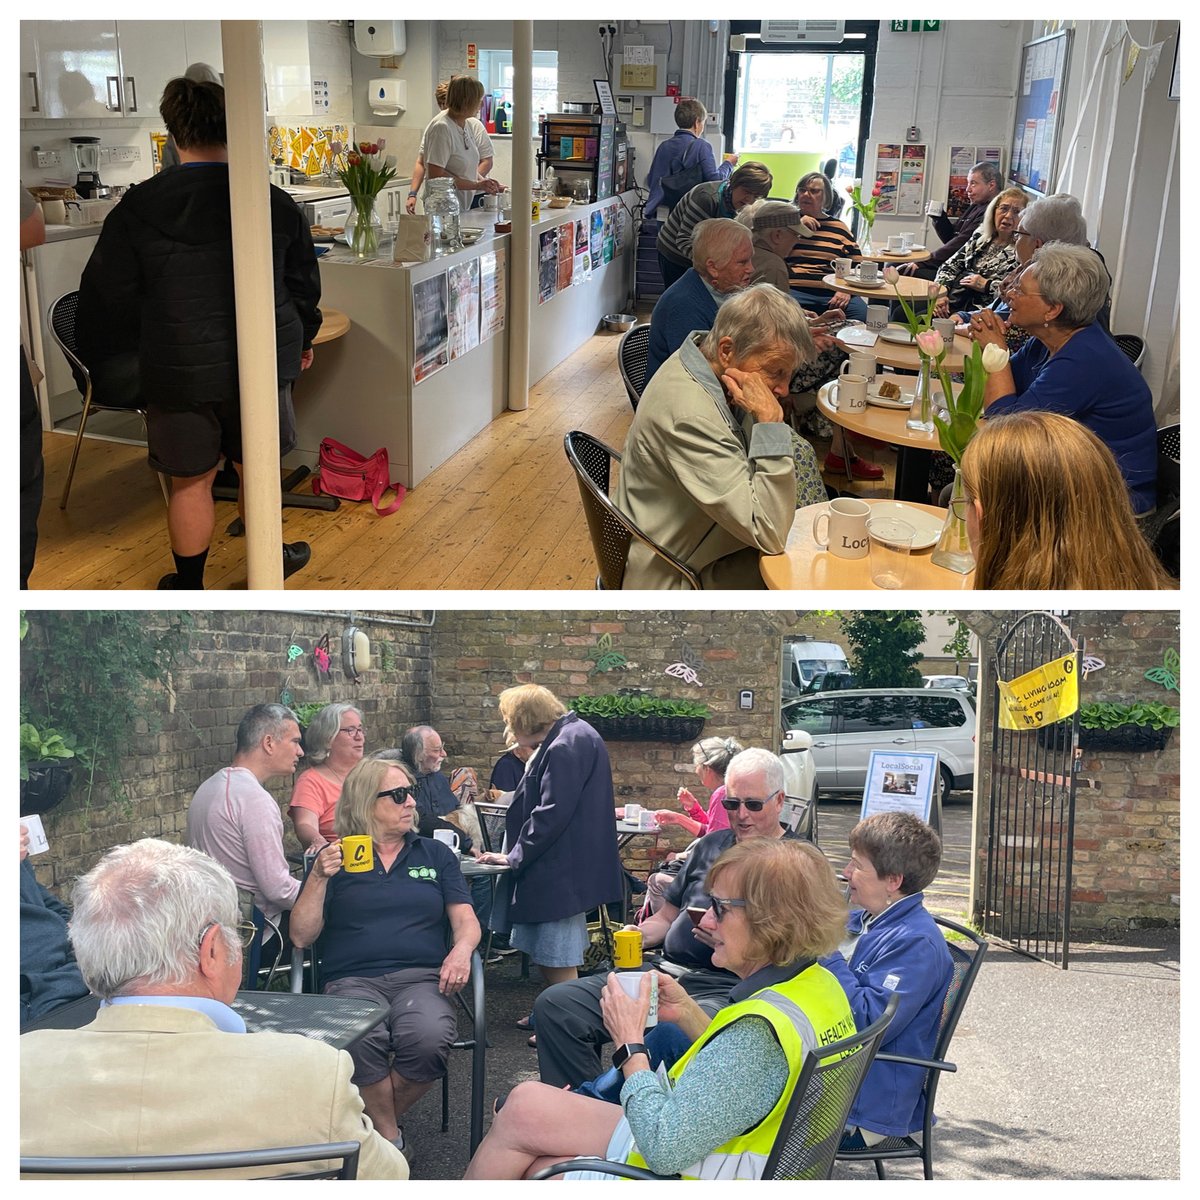 Just a brilliant morning, inside & out ⁦@southernmalting⁩. Great partnering with ⁦@HertsHealthWalk⁩. Real buzz of connection, friendship & mutual support. ⁦@WareTownCouncil⁩ ⁦@HertsCommunityF⁩ ⁦@Camerados_org⁩ ⁦@CommCats⁩